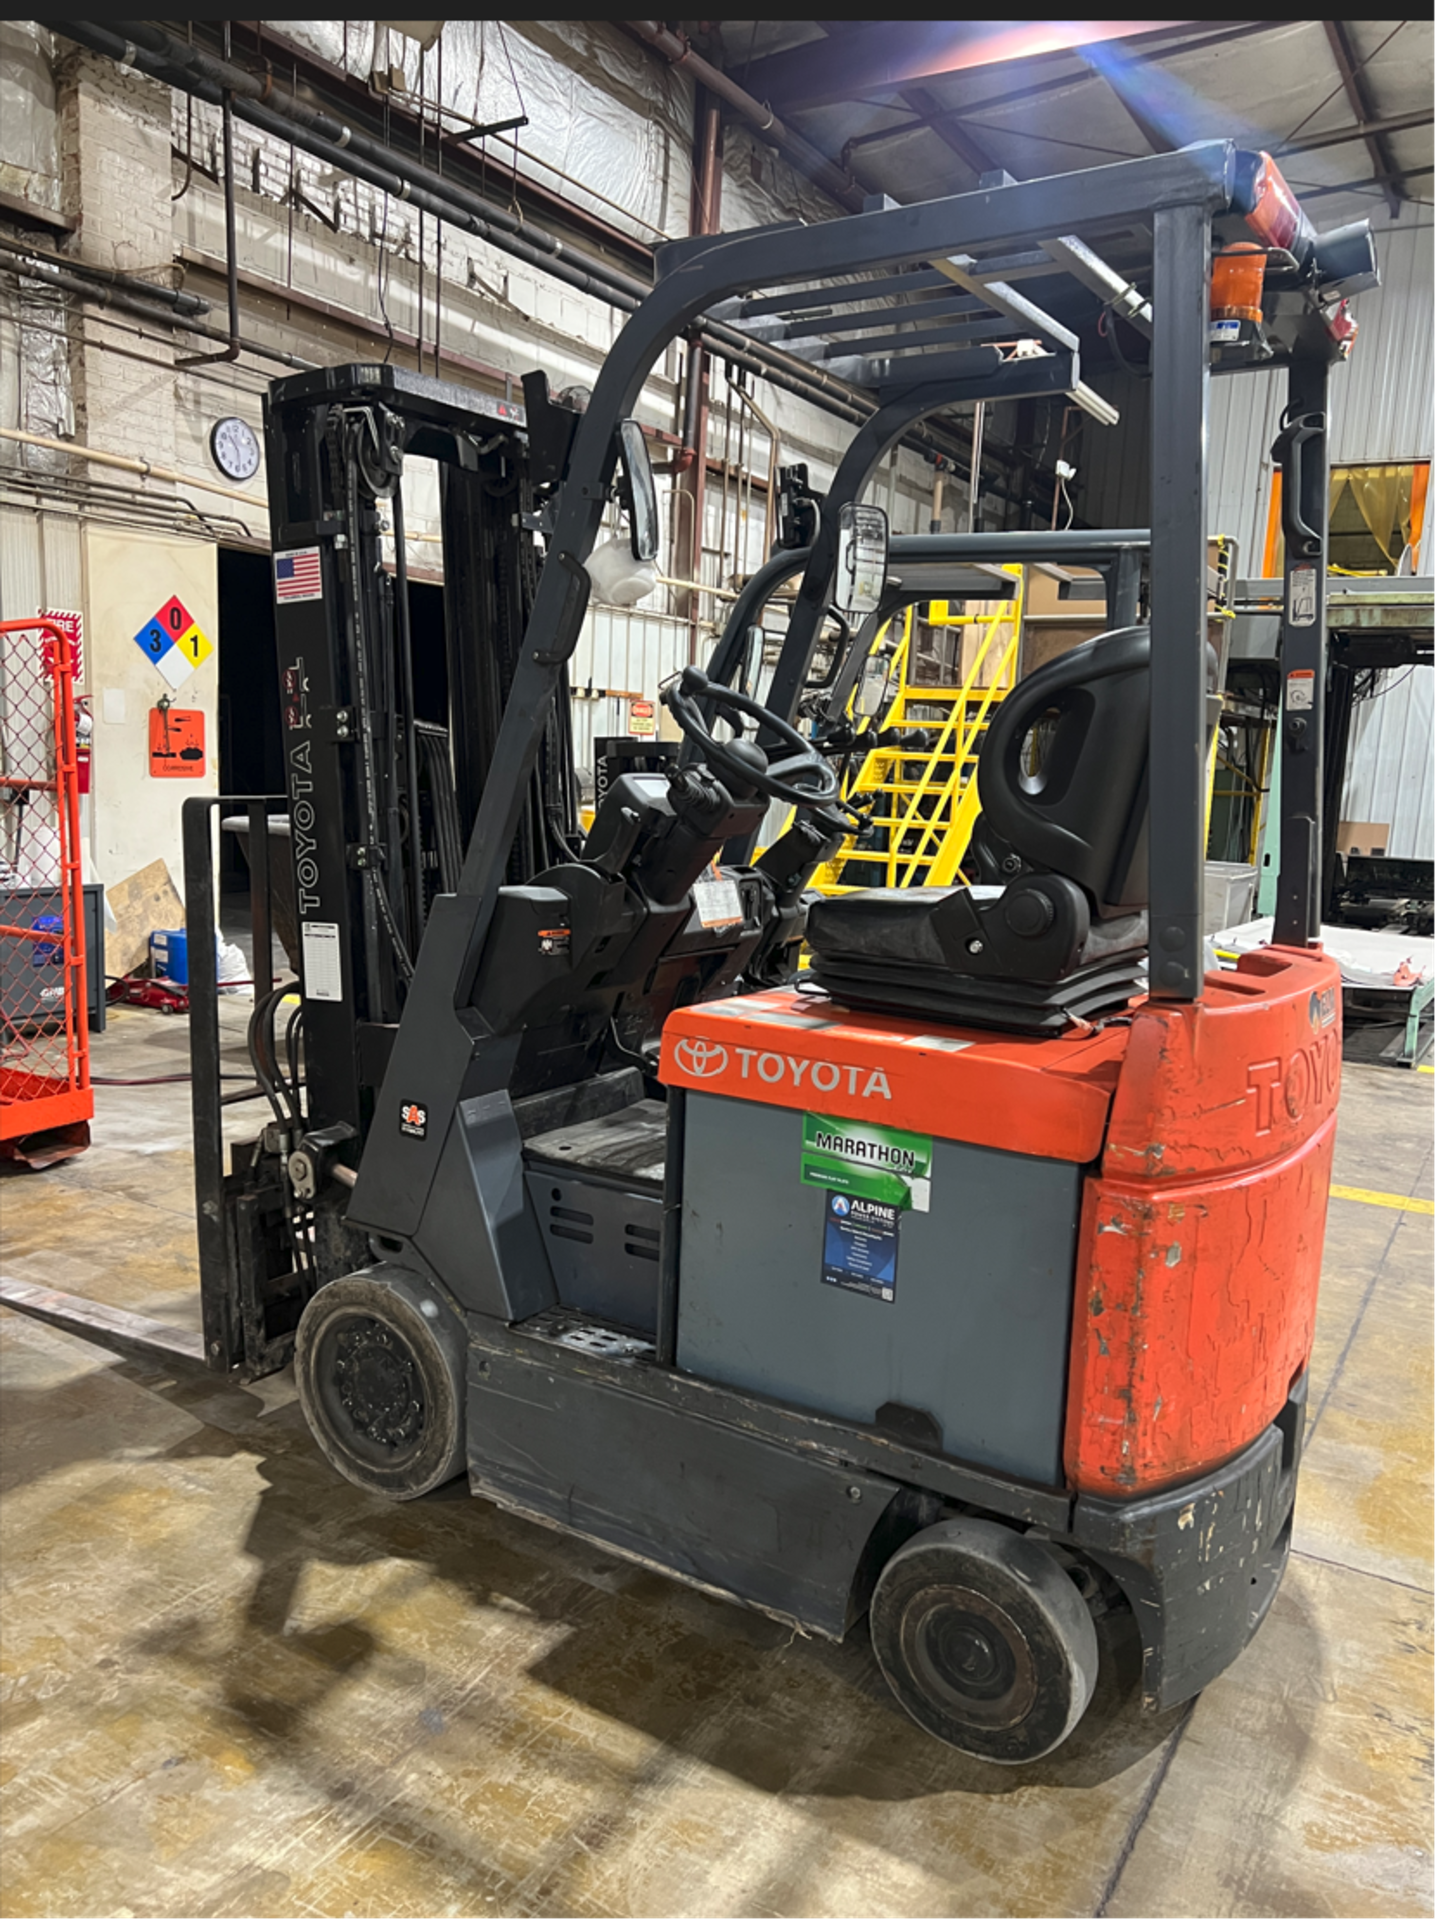 Toyota Electric Side Shift Forklift Truck with Adjustable Forks (Subject to Seller's Confirmation) - Image 4 of 13